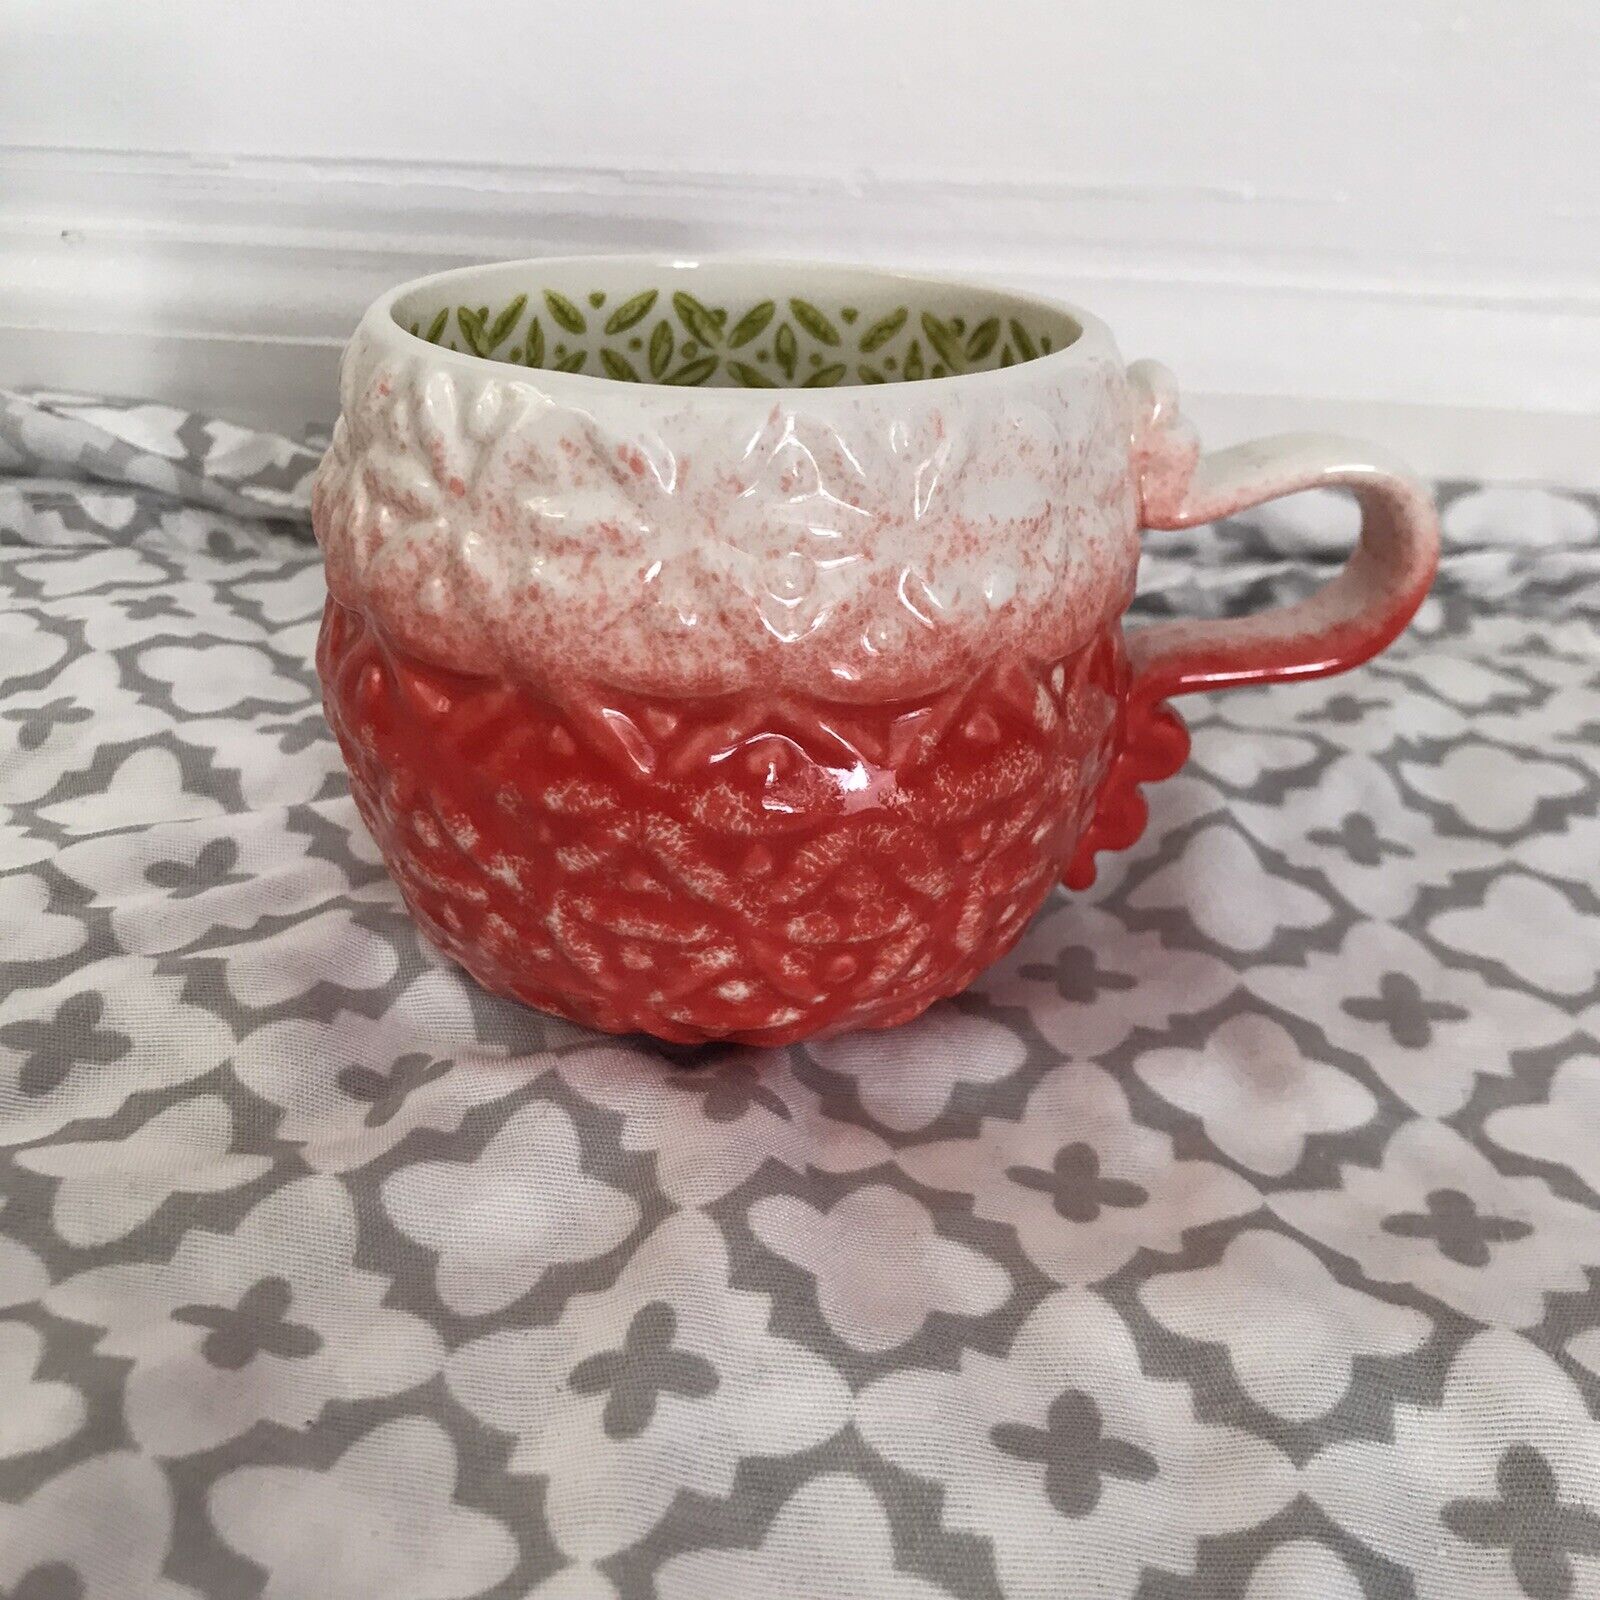 Anthropologie Marshmallow Mug - Raised Pattern - Ombre Coral Red Green White EXC